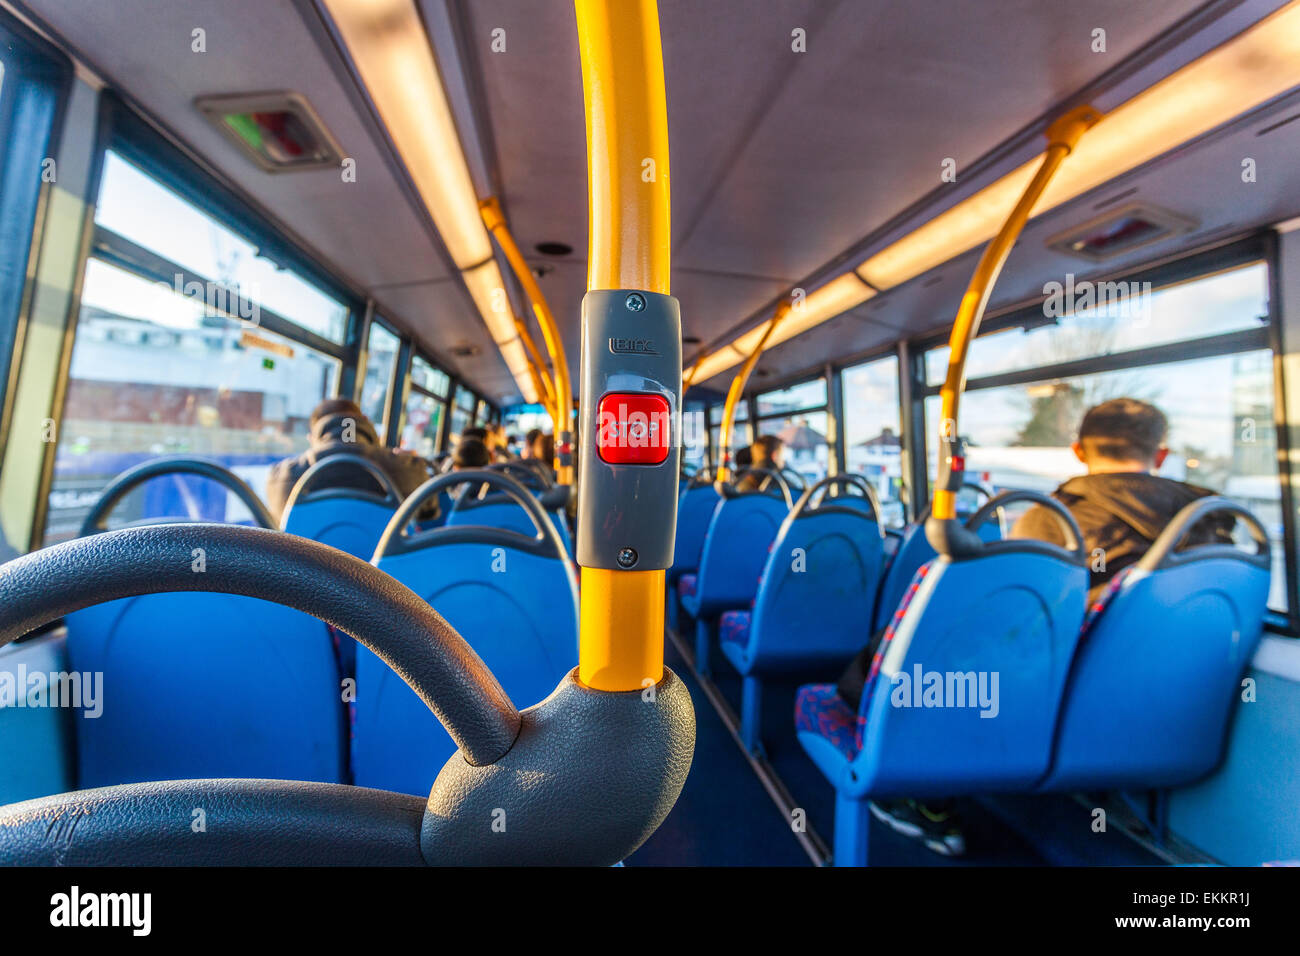 Bell push on the upper deck of a double decker bus, London, England, UK Stock Photo